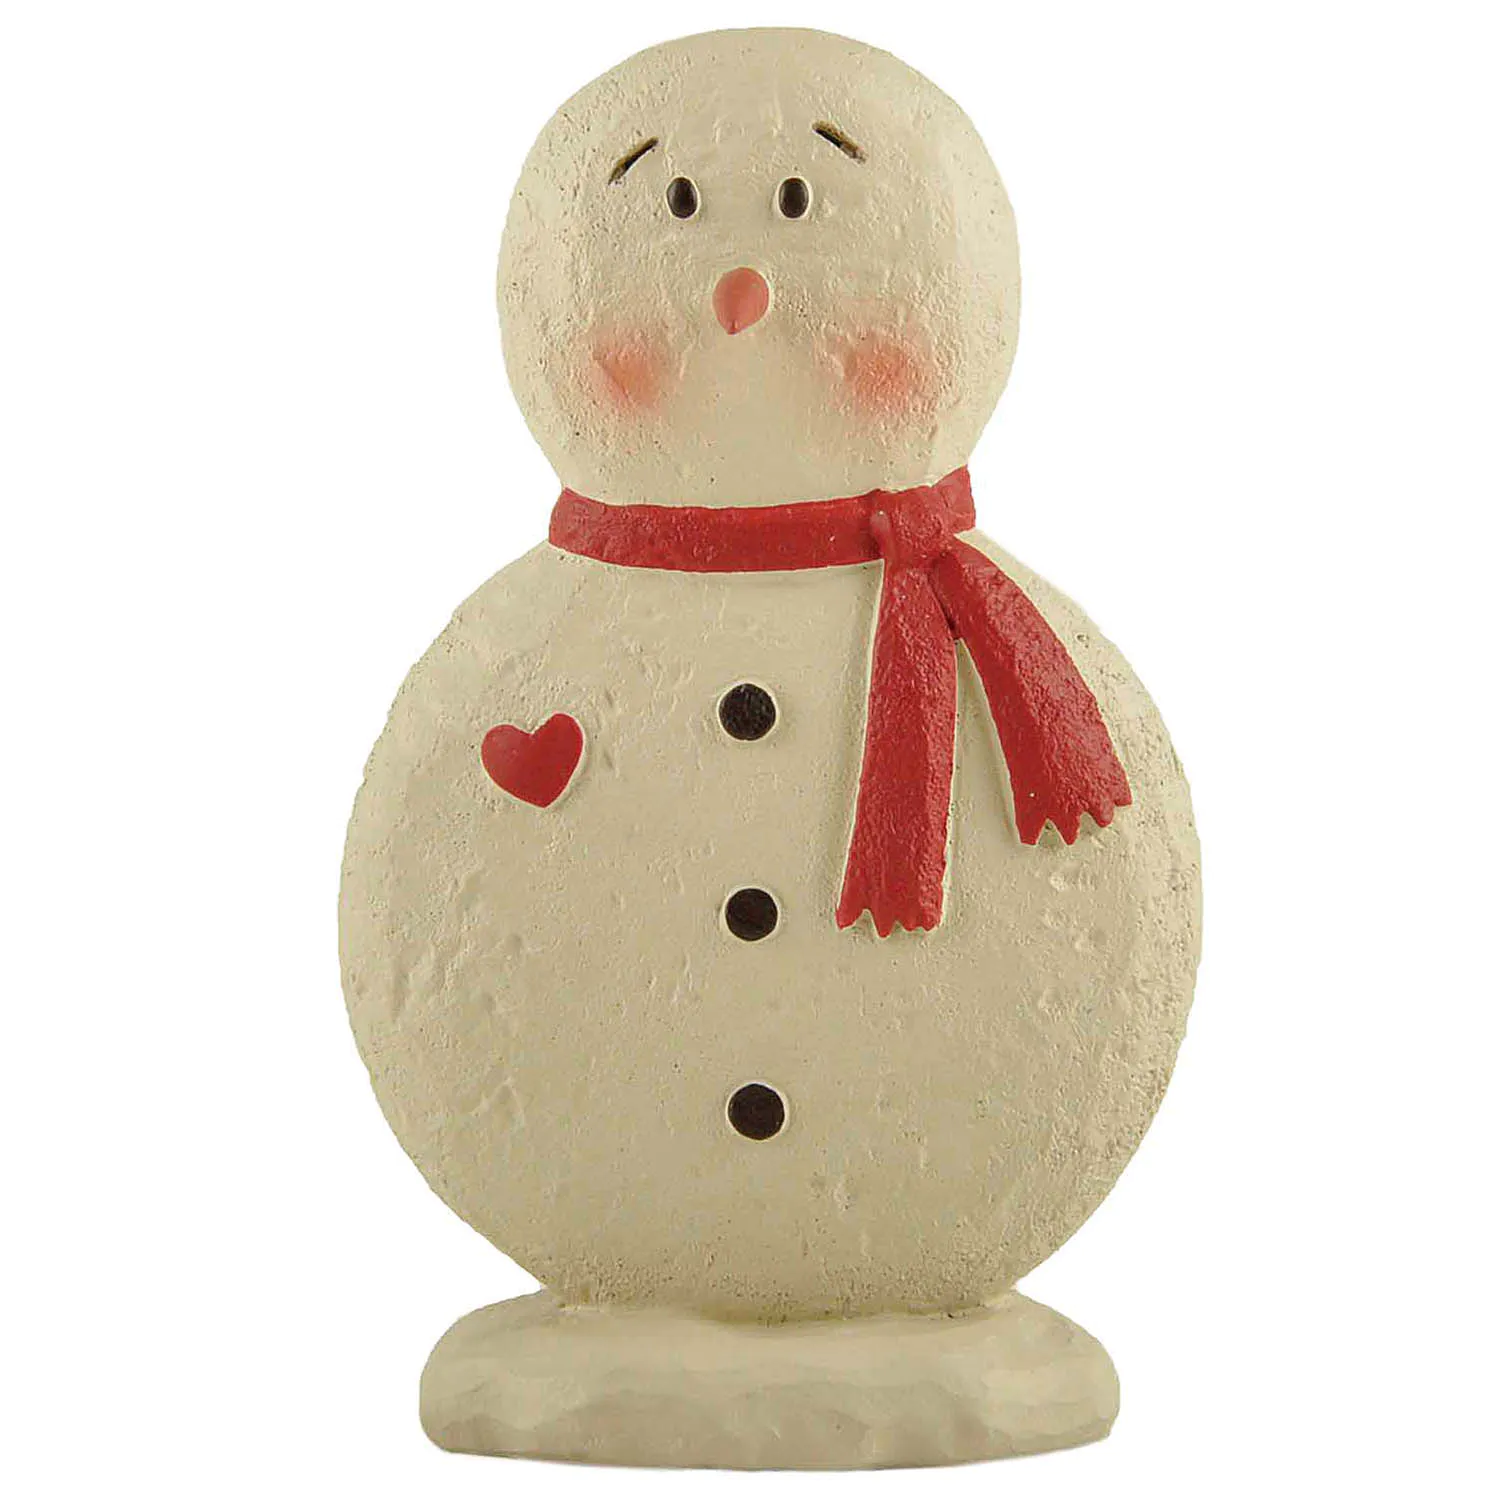 Customized Resin Christmas Crafts Cute Snowman w Red Heart & Scarf Figurines for Home Decor 238-13739